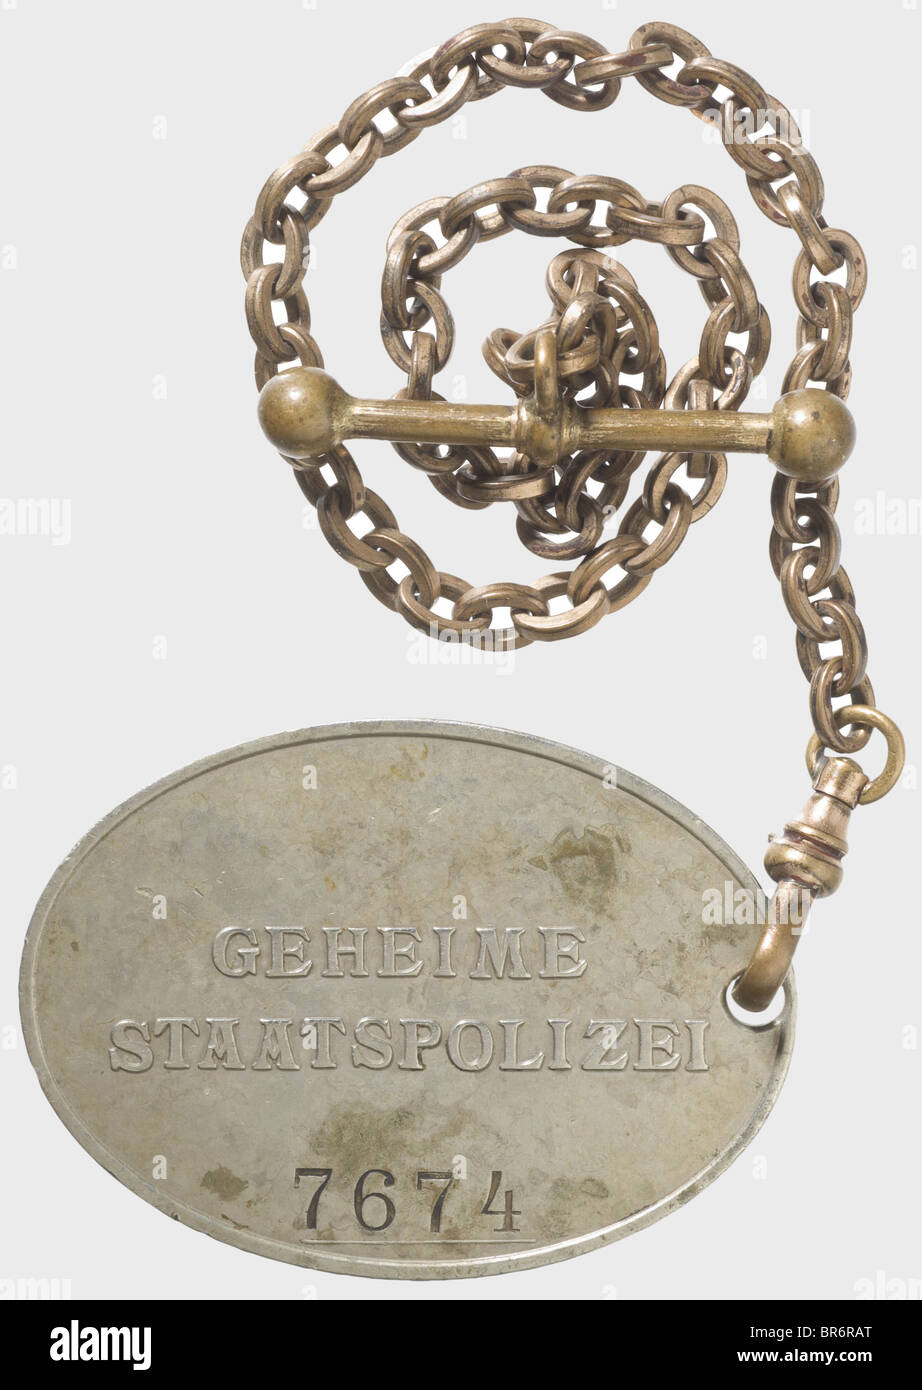 A badge '7674' of the GESTAPO., Nickel-silver, raised national eagle and the inscription 'GEHEIME STAATSPOLIZEI' (Secret State Police) in the typical caption, above the stamped number '7674'. Dimensions 37 x 51 mm. On a non-ferrous metal chain with snap hook and buttonhole toggle, also remnants of gilding. In addition an expertise of authenticity by Don Bible, September 2008. Of utmost rareness. historic, historical, 1930s, 1930s, 20th century, medal, decoration, medals, decorations, honouring, honor, honour, honors, honours, badge, badges, object, objects, sti, Stock Photo